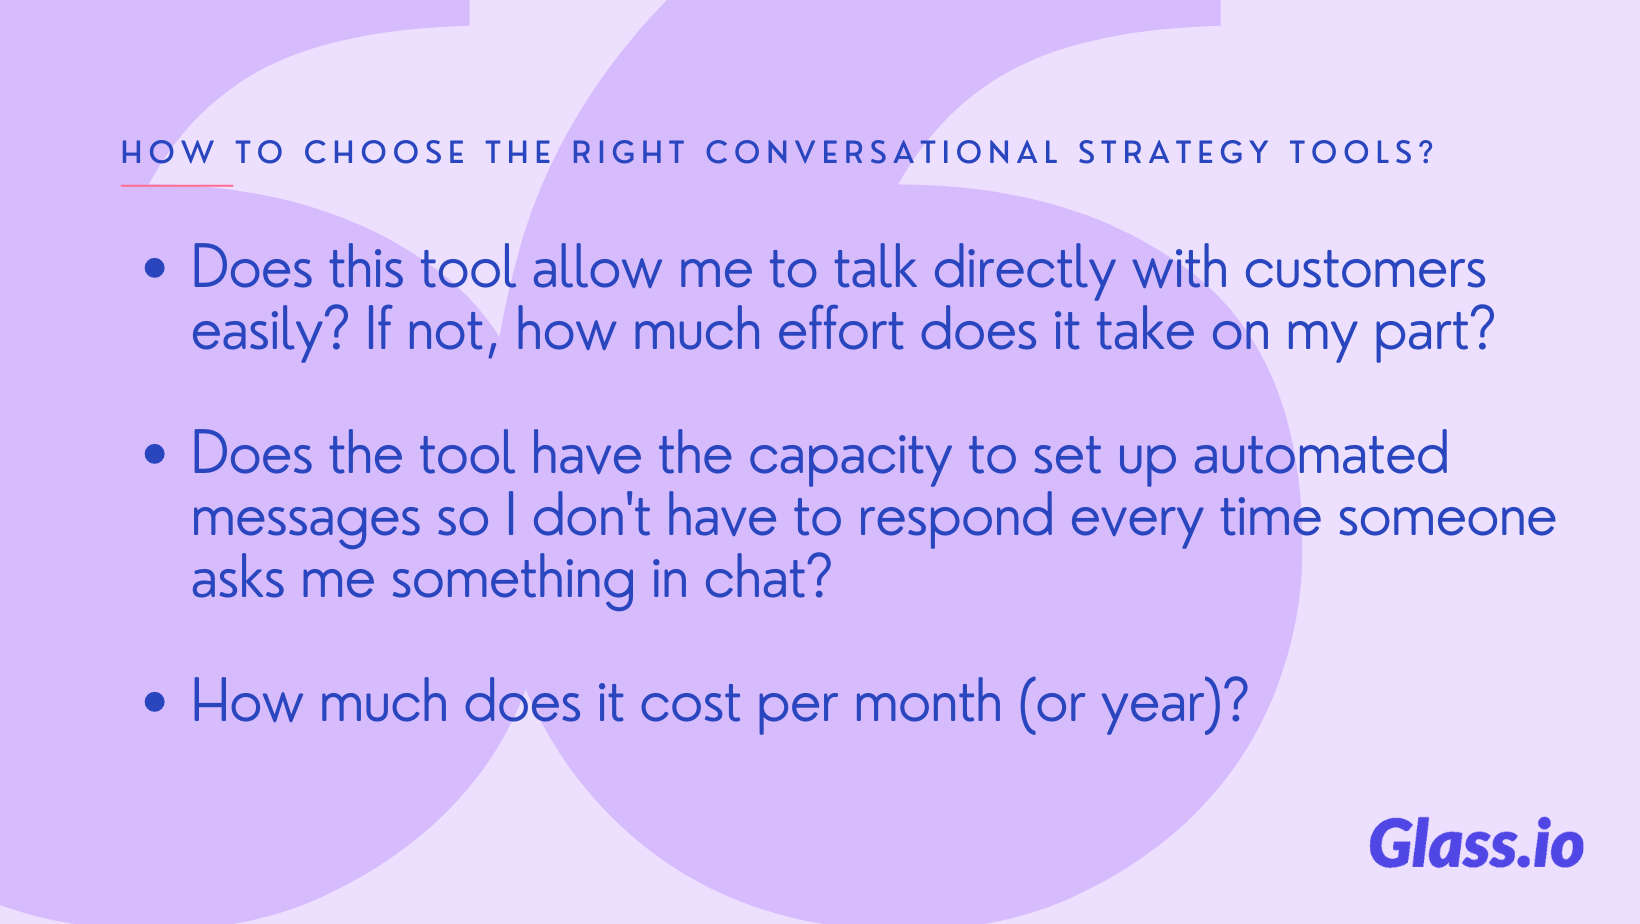 How to choose the right conversational strategy tools